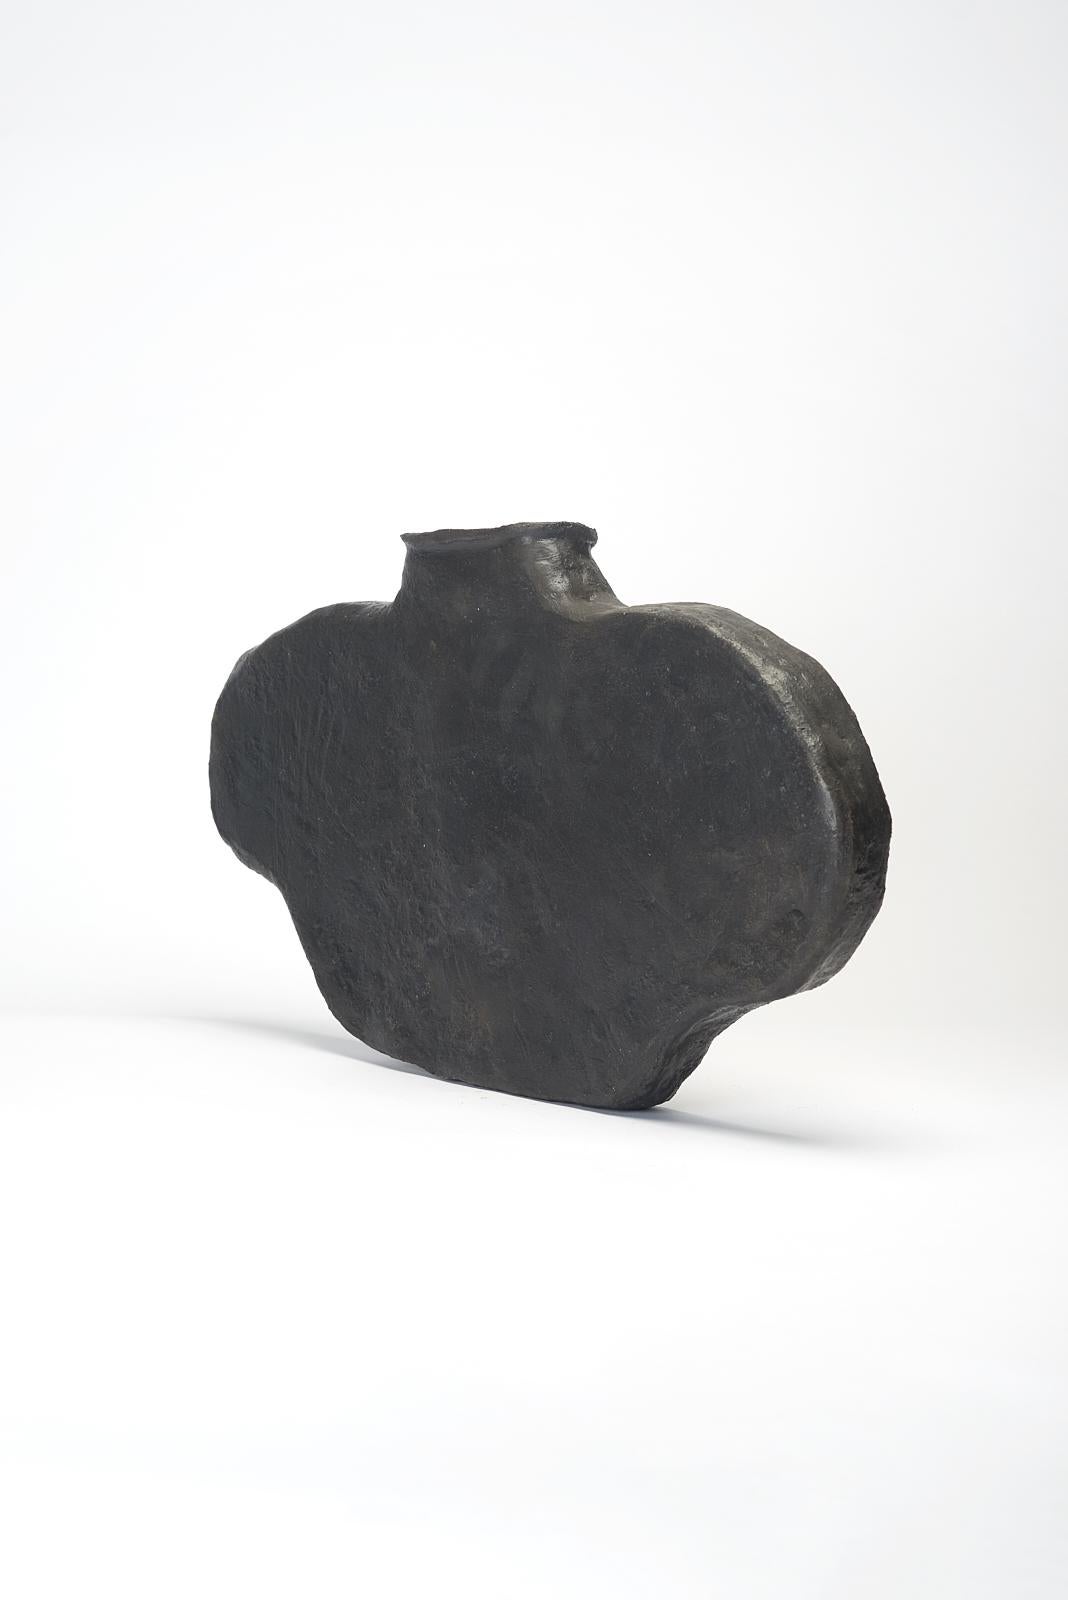 Lira Vase by Willem Van hooff
Core Vessel Series
Dimensions: W 42 x D 10 x H 35 cm (Dimensions may vary as pieces are hand-made and might present slight variations in sizes)
Materials: Earthenware, ceramic, pigments, glaze

Core is a series of flat